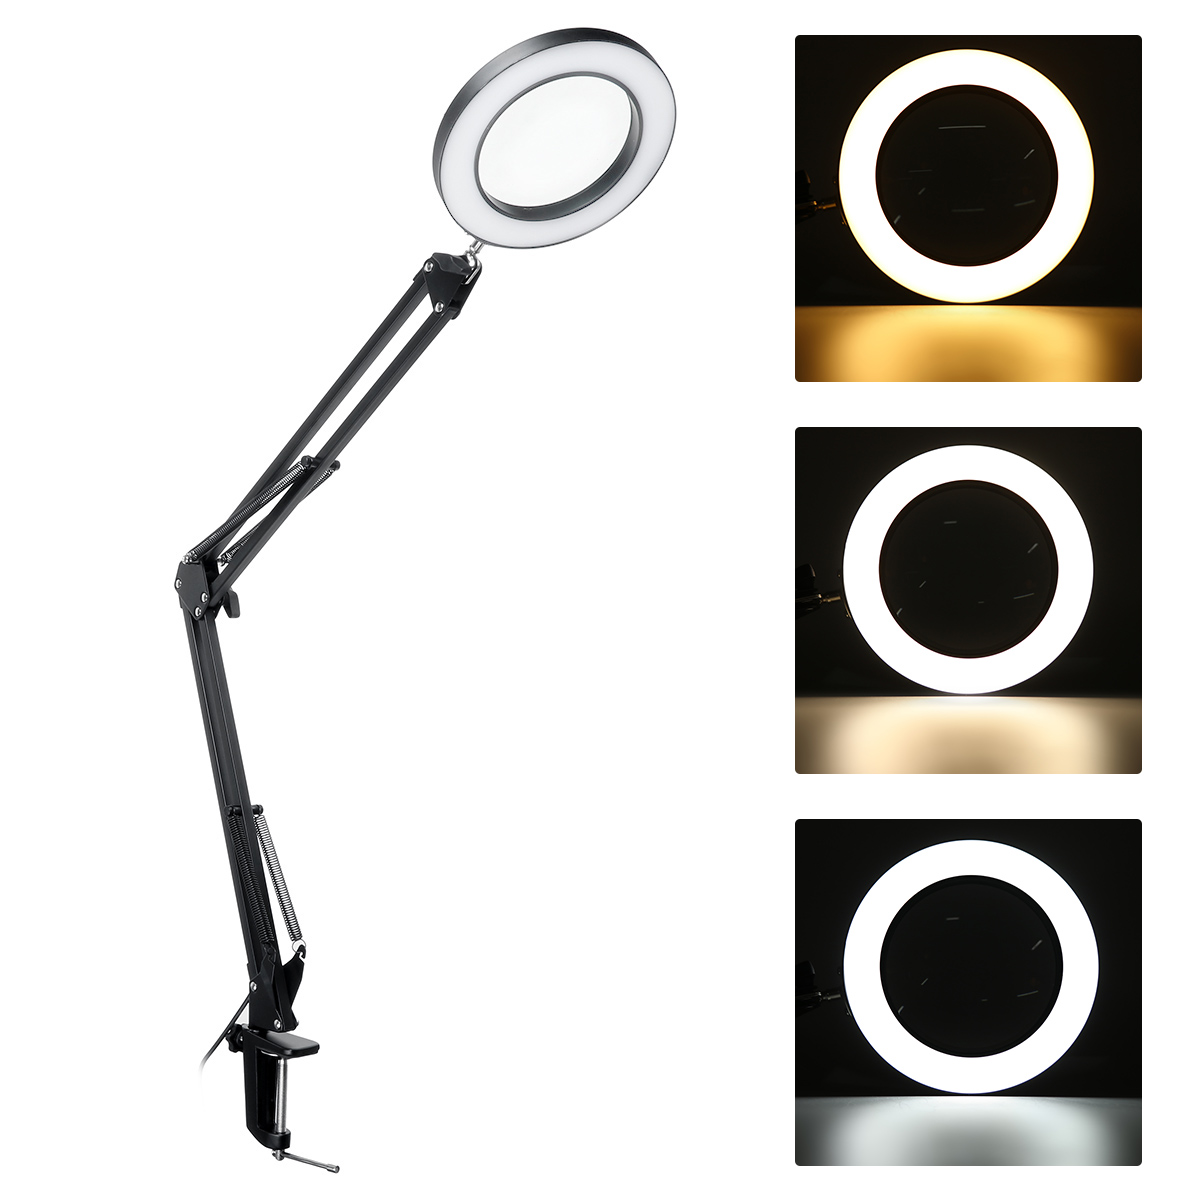 5X-Magnifying-Lamp-Clamp-Mount-LED-Magnifier-Lamp-Manicure-Tattoo-Beauty-Light-1801341-2